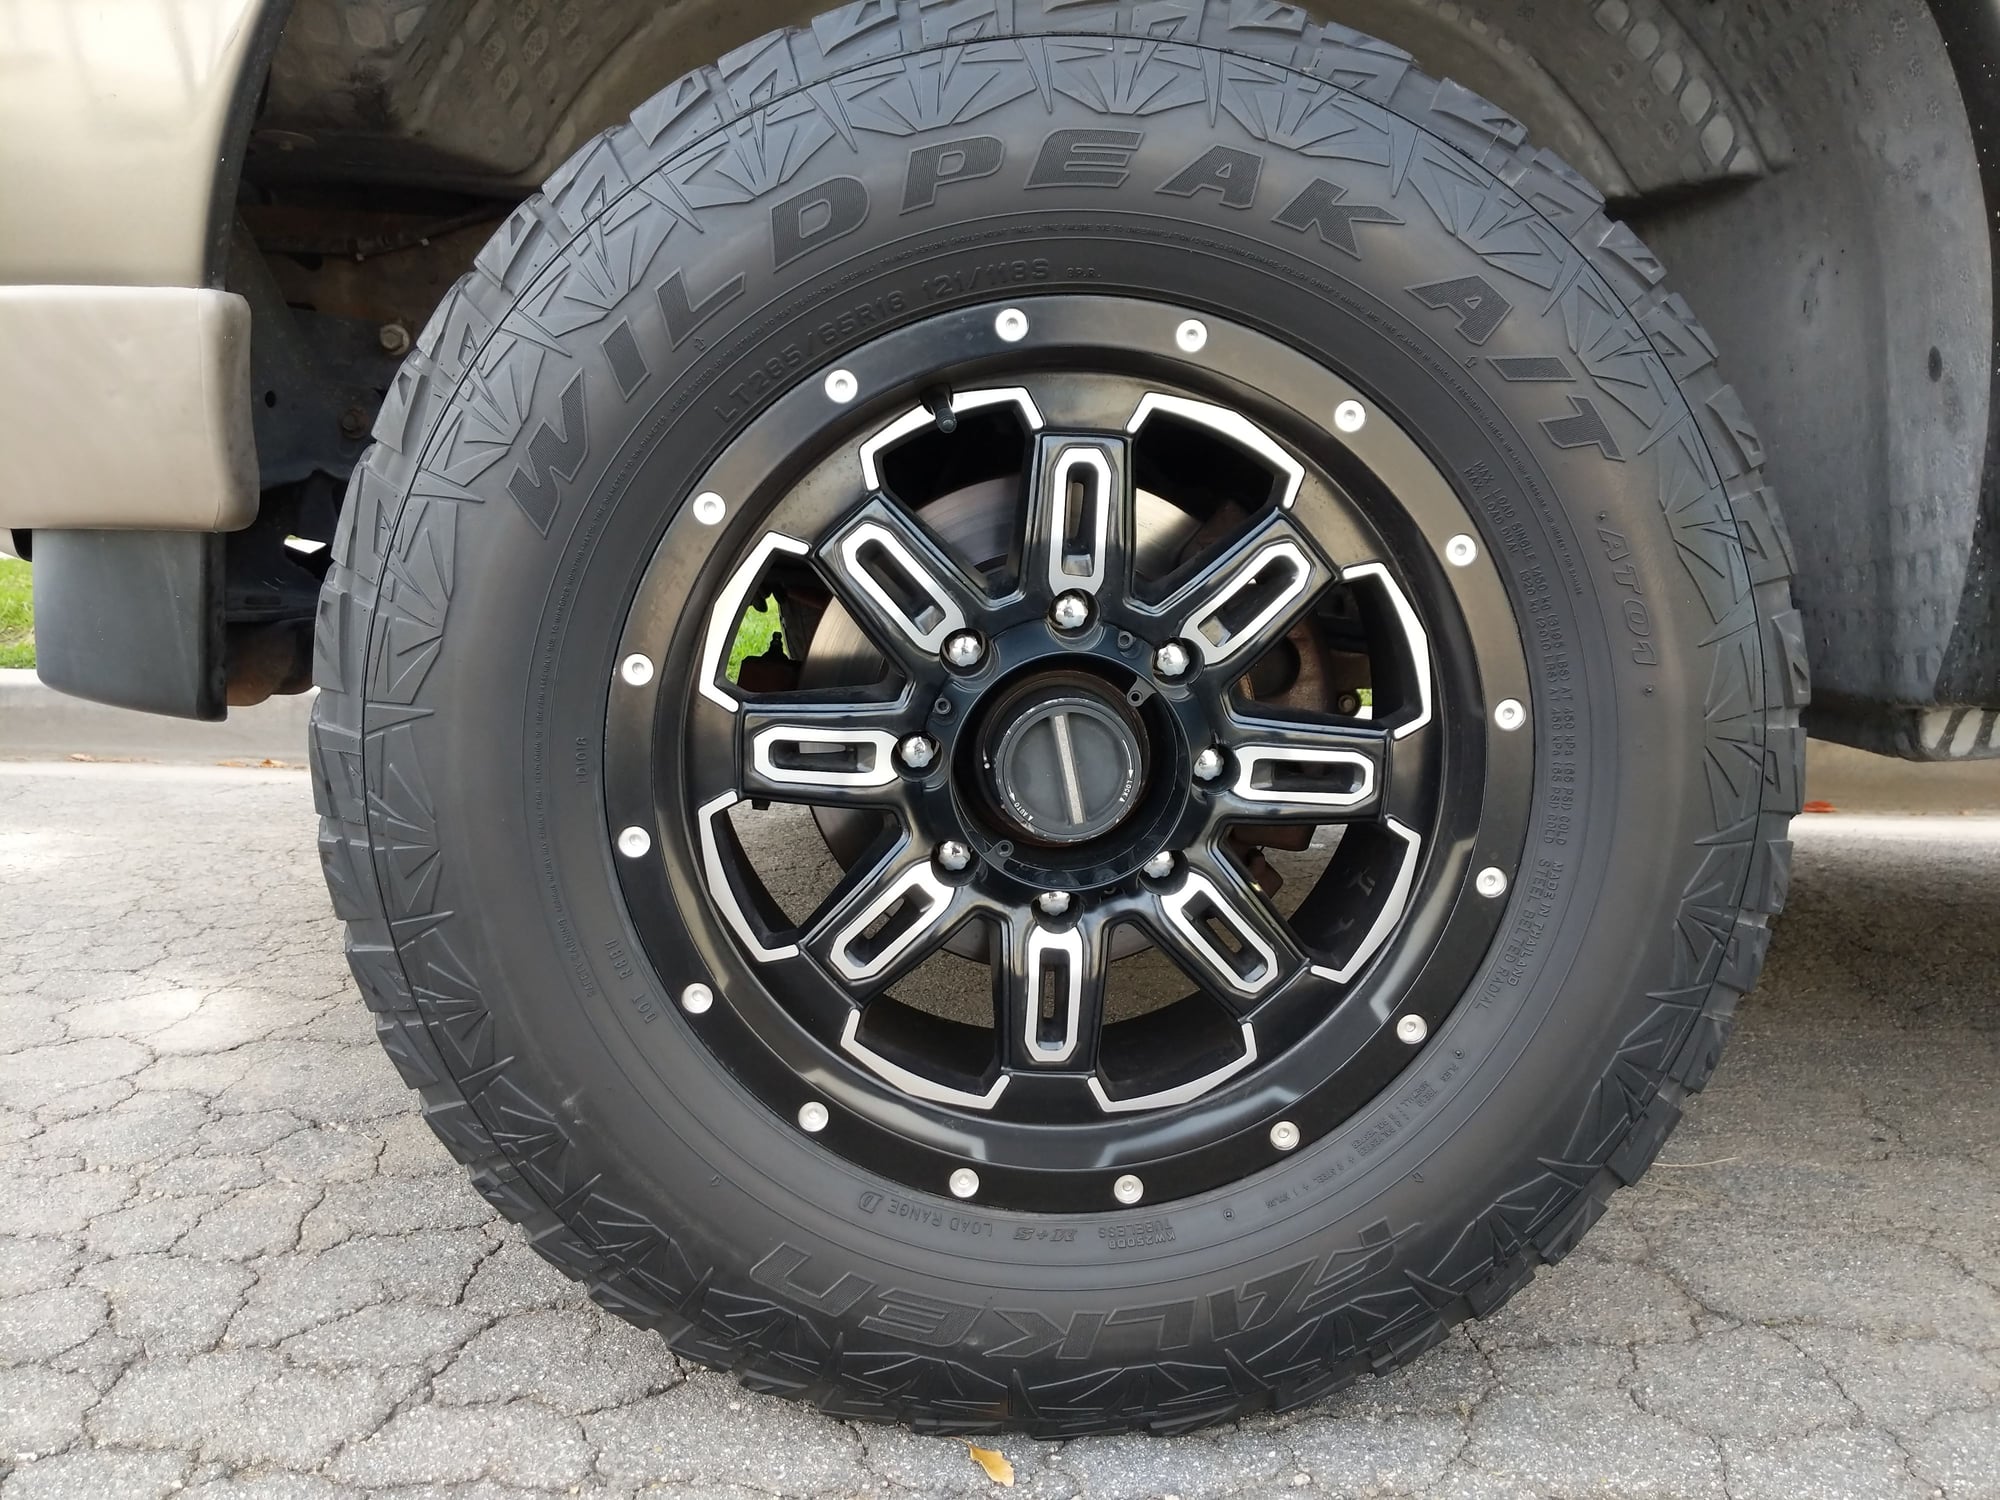 Wheels and Tires/Axles - Gear 18" with Wildpeak A/T 285/65 - Used - All Years Ford Excursion - All Years Ford 3/4 Ton Pickup - All Years Ford 1 Ton Pickup - Long Beach, CA 90815, United States